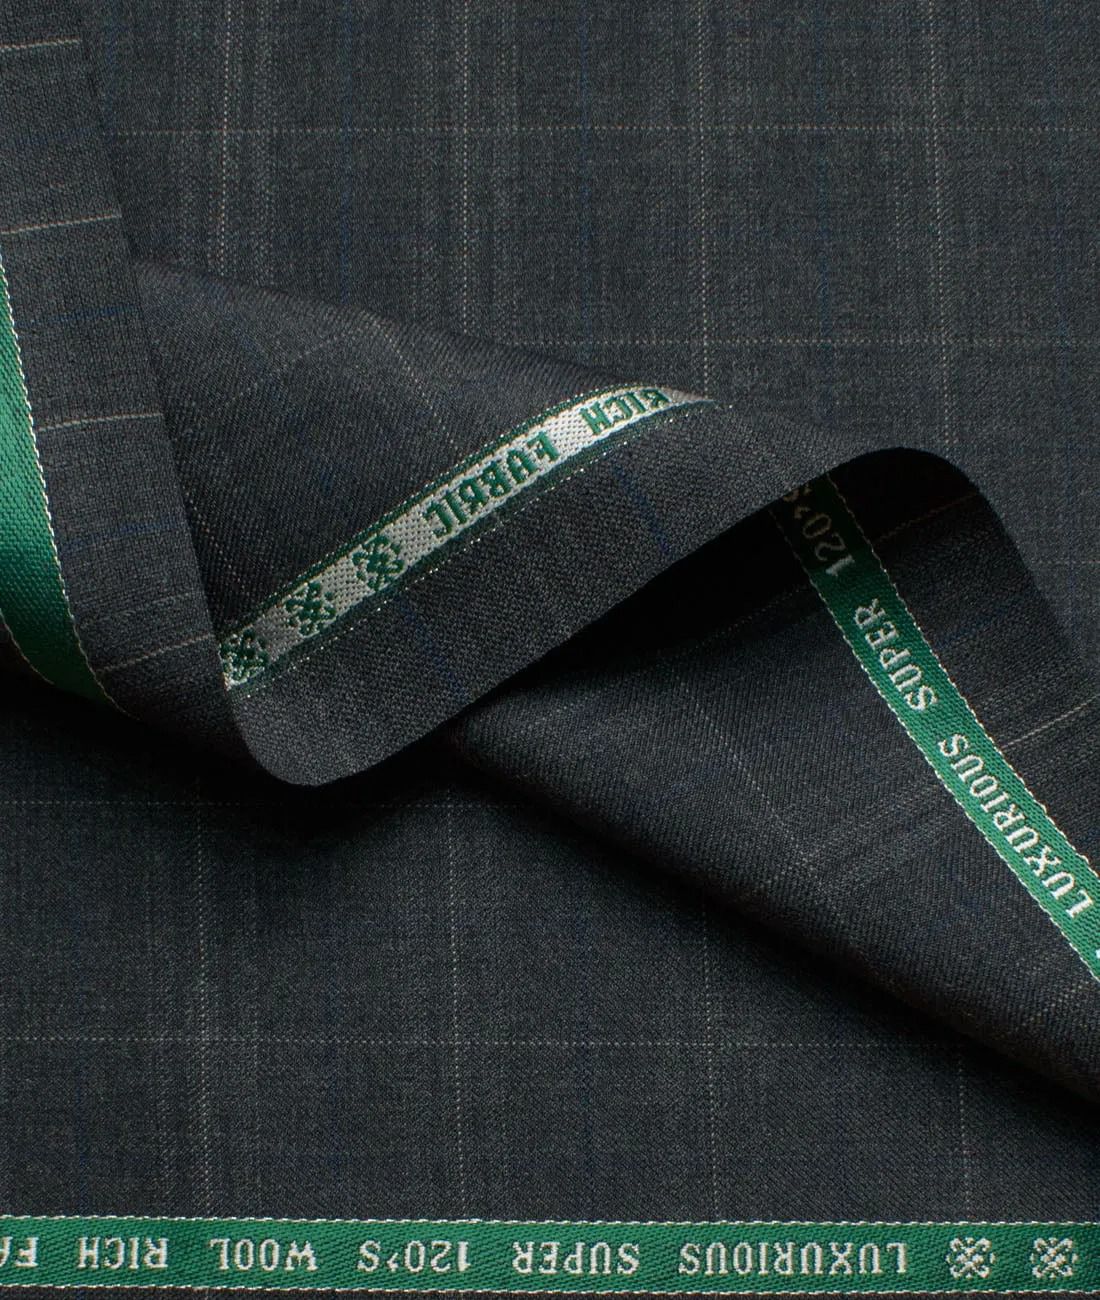 Wool Checks Super 120GÇÖs Unstitched Suiting Fabric (Dark Grey) very fine & soft feel casual